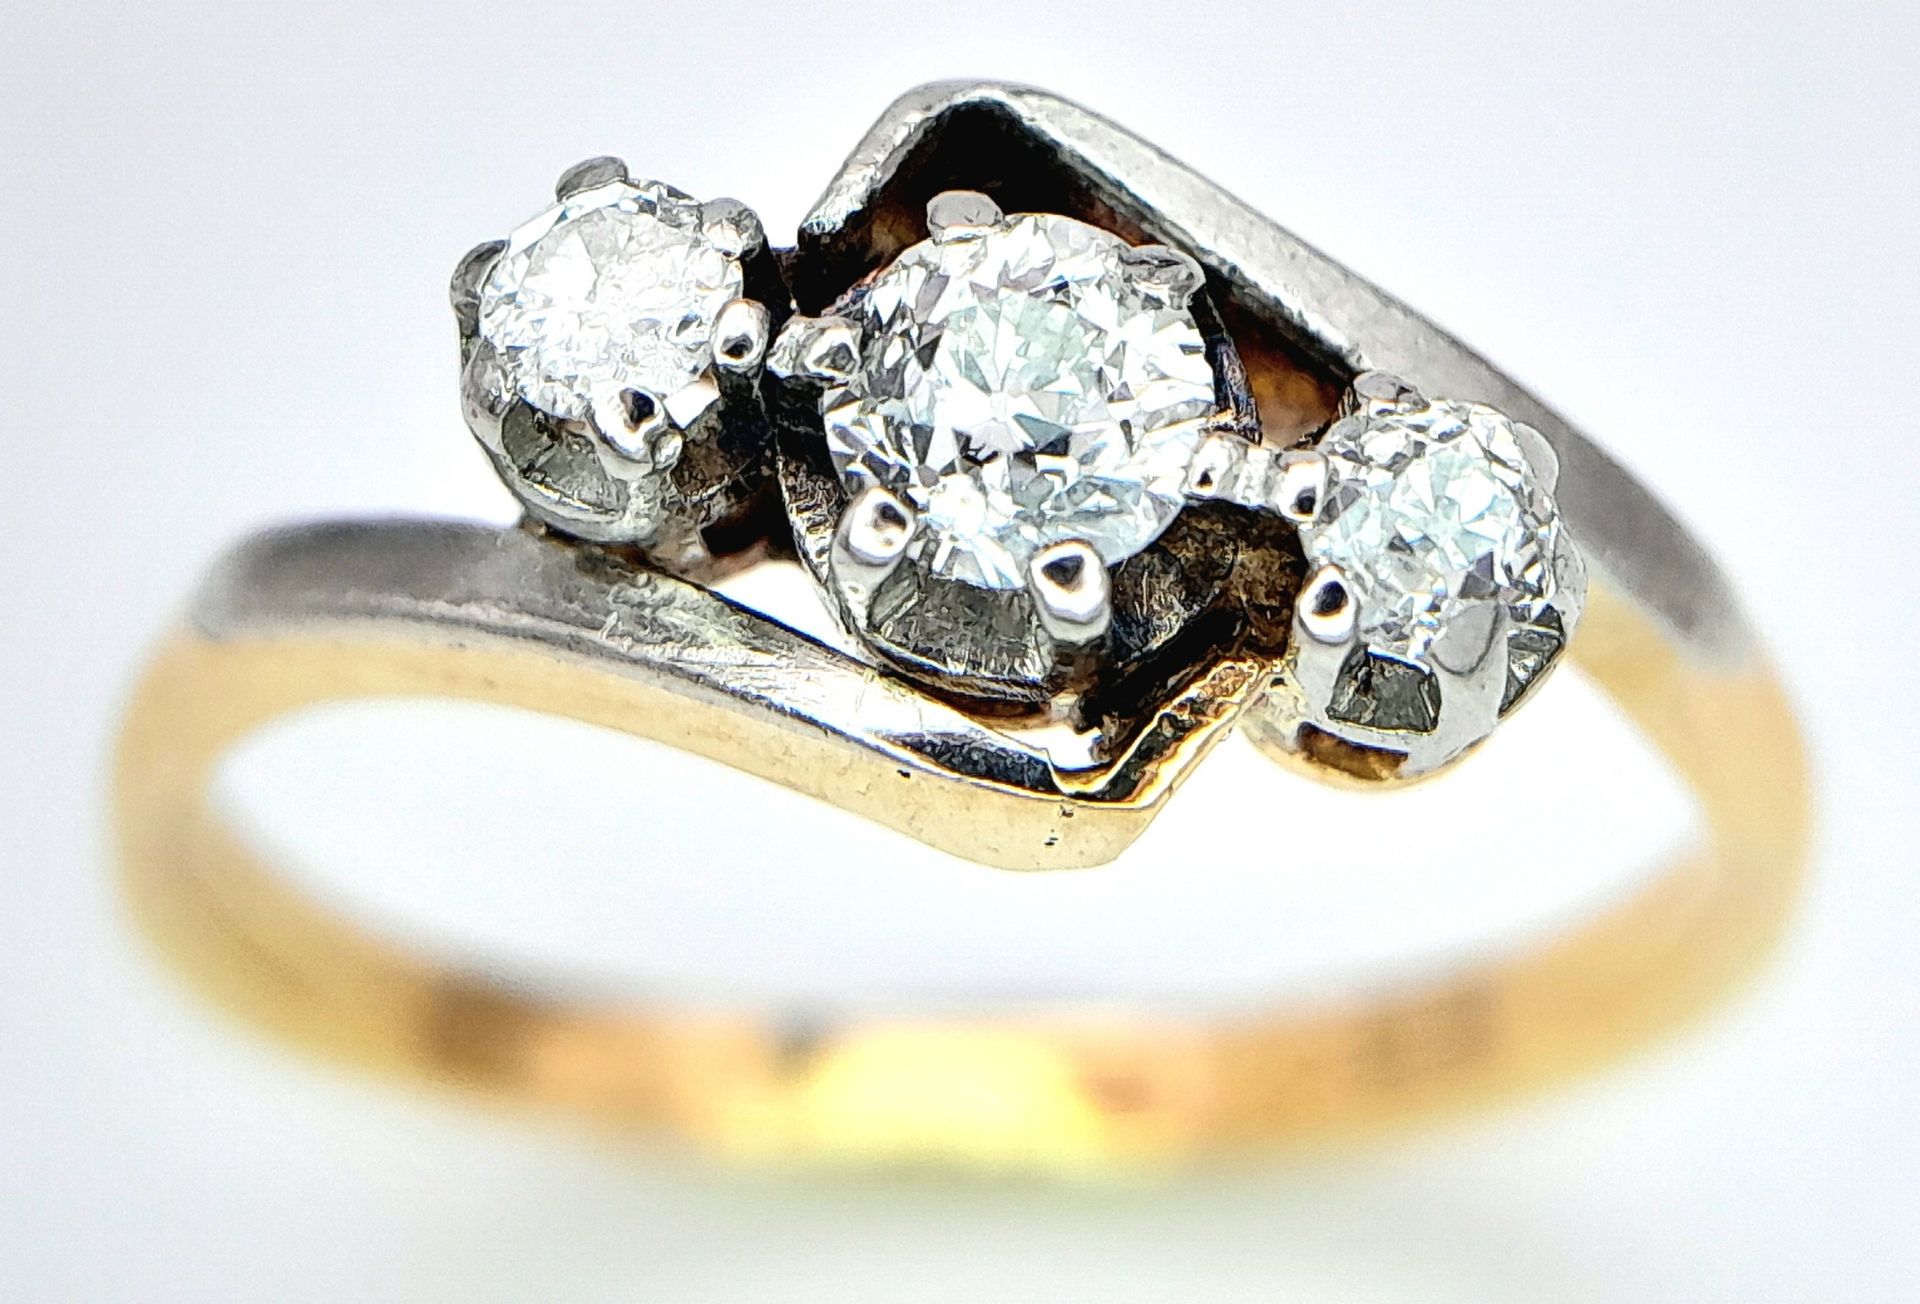 AN 18K YELLOW GOLD, DIAMOND SET, CROSSOVER 3 STONE RING. 0.25CT. 2.8G. SIZE L - Image 2 of 6